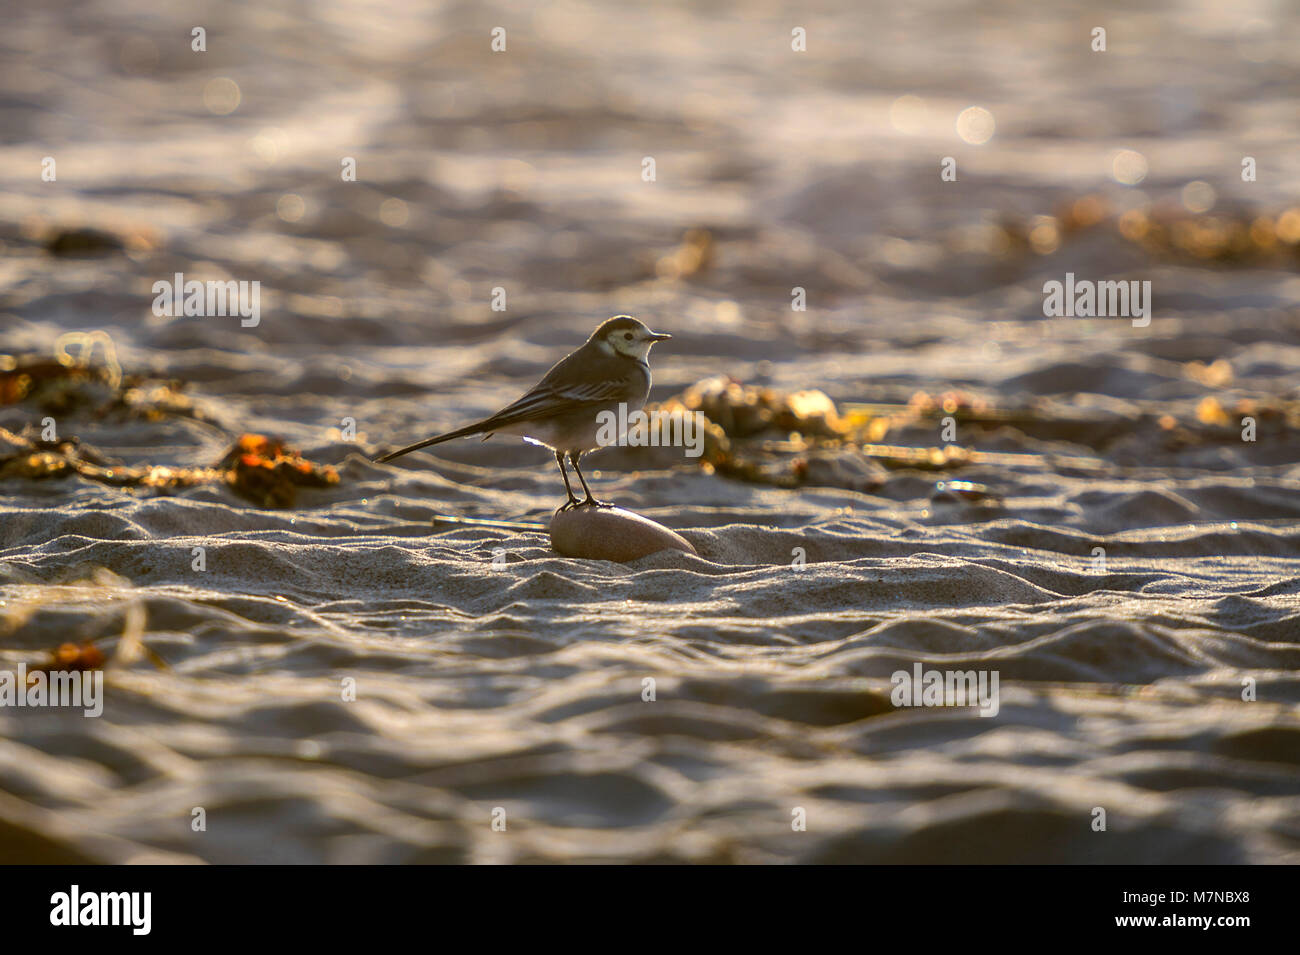 Pied Wagtail (Motacilla alba) on the beach portrait collection Stock Photo